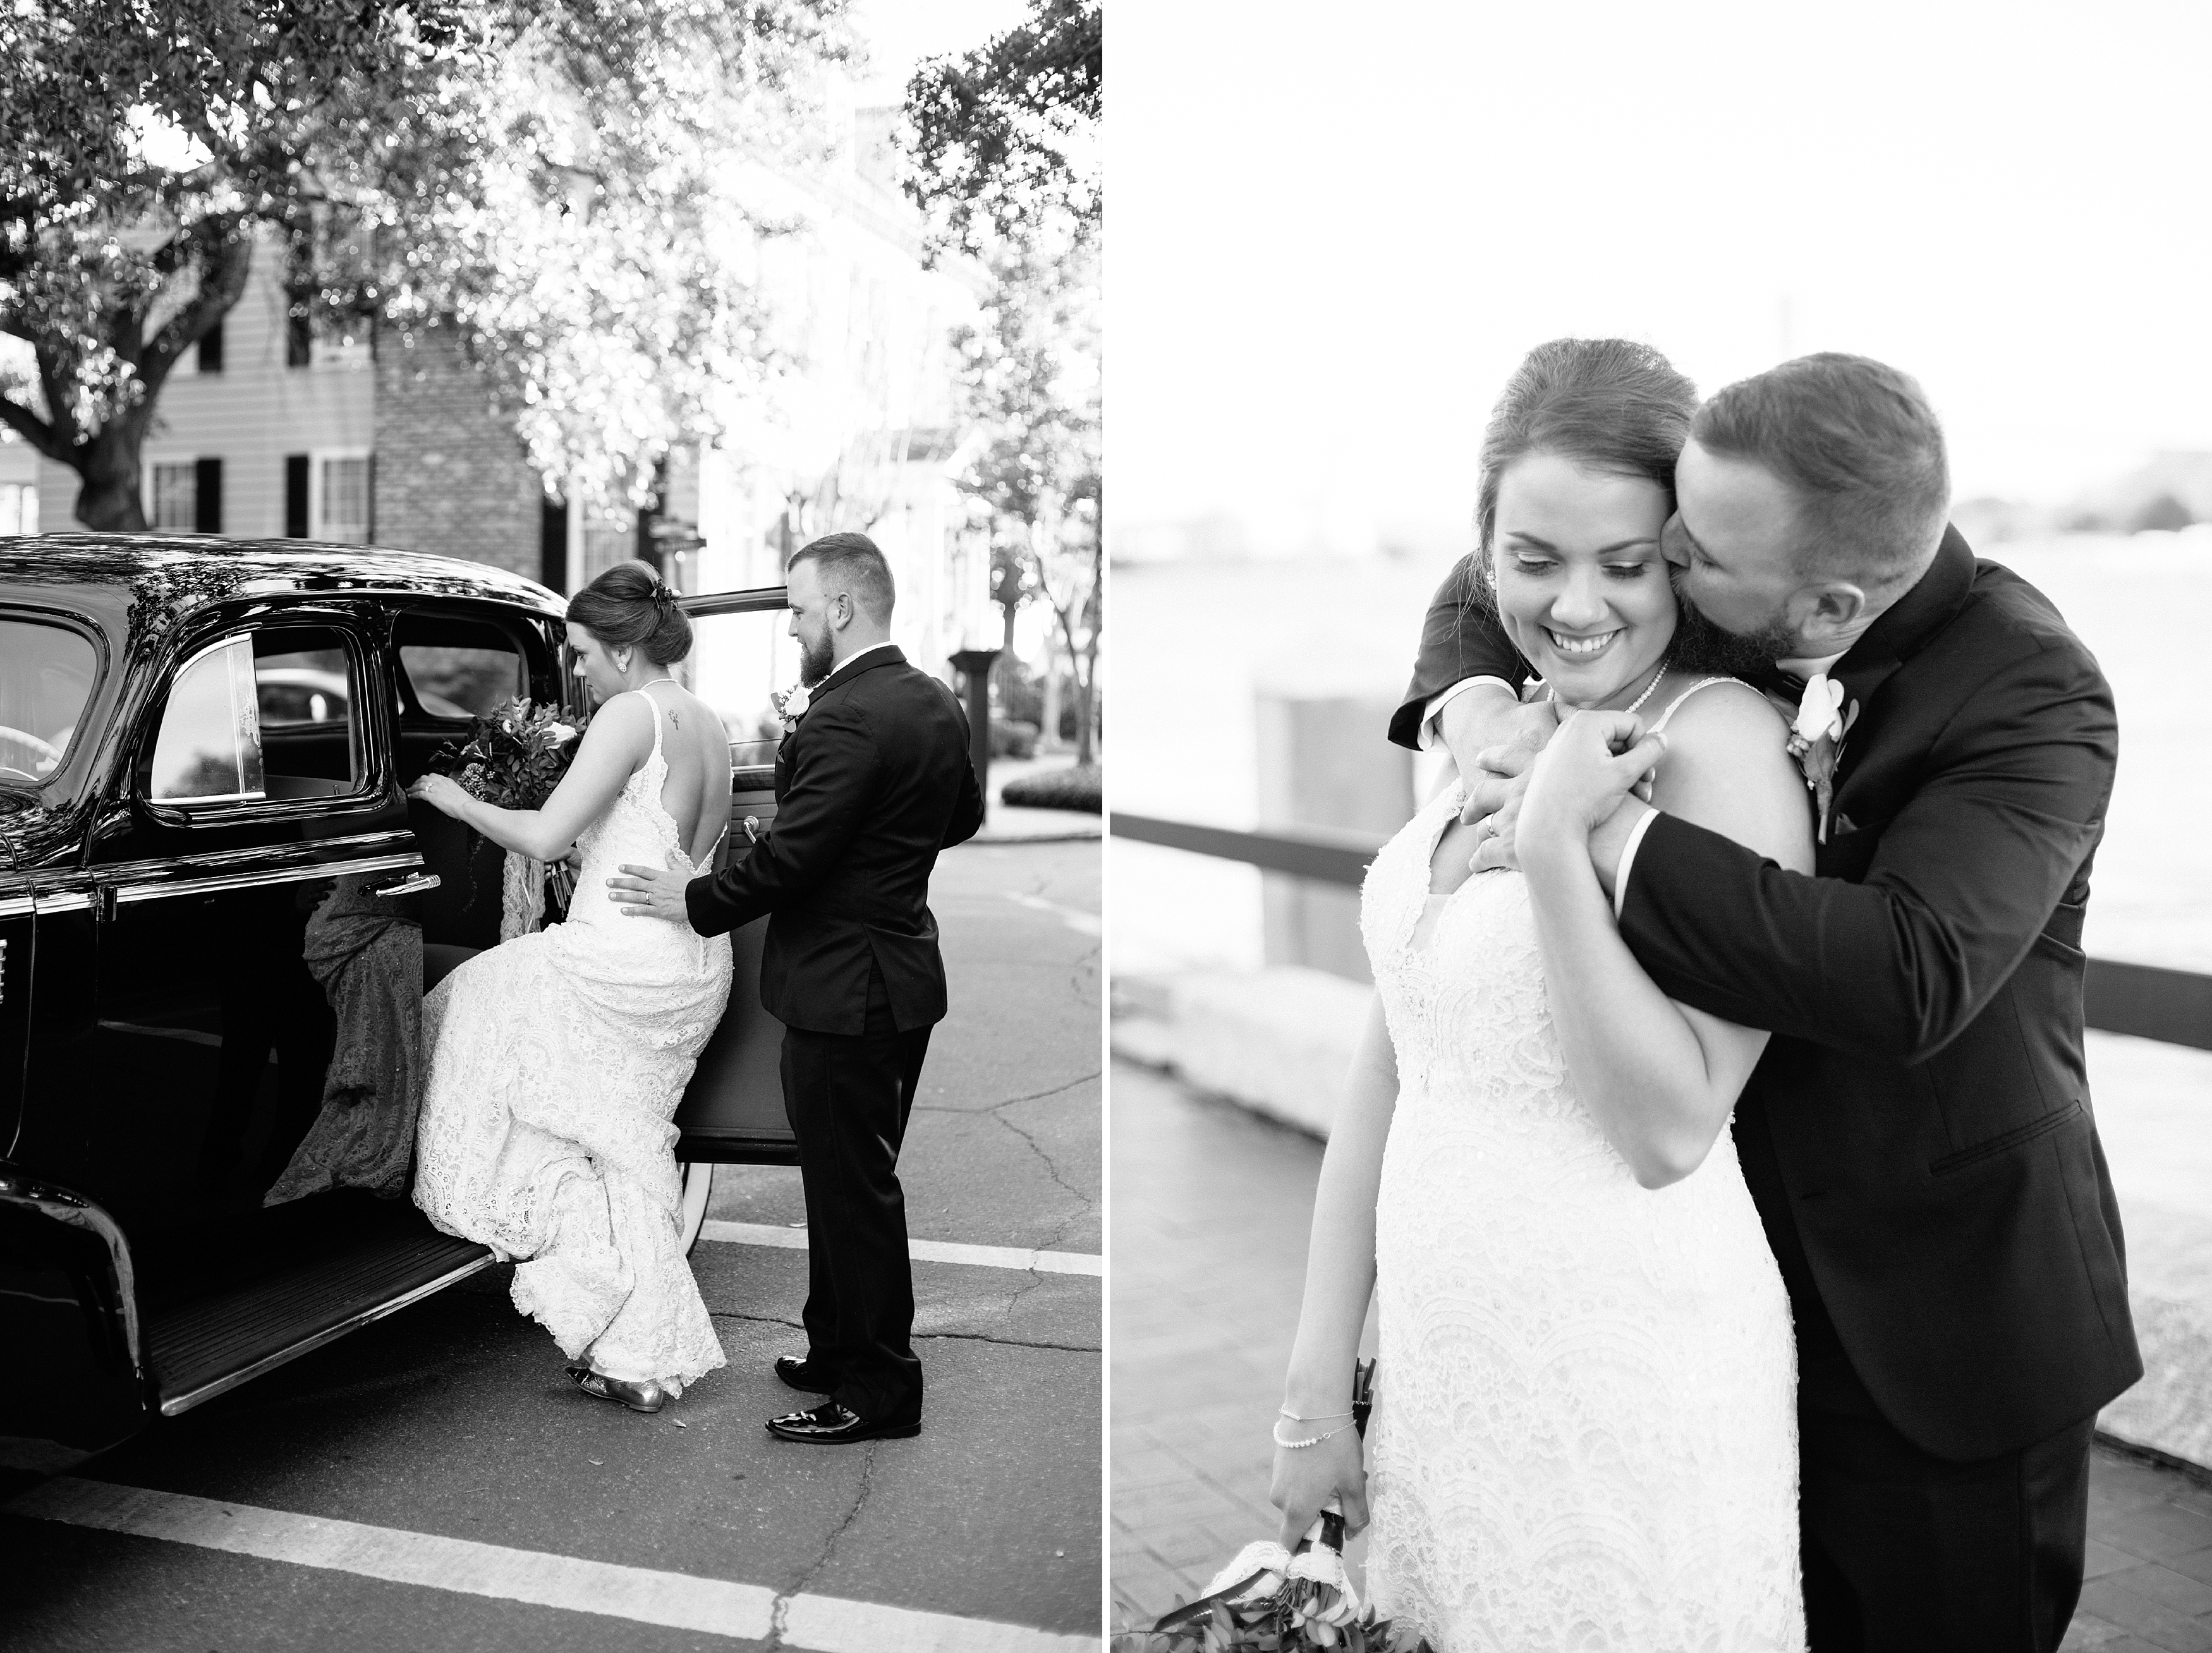 Black and white photos of bride and groom.